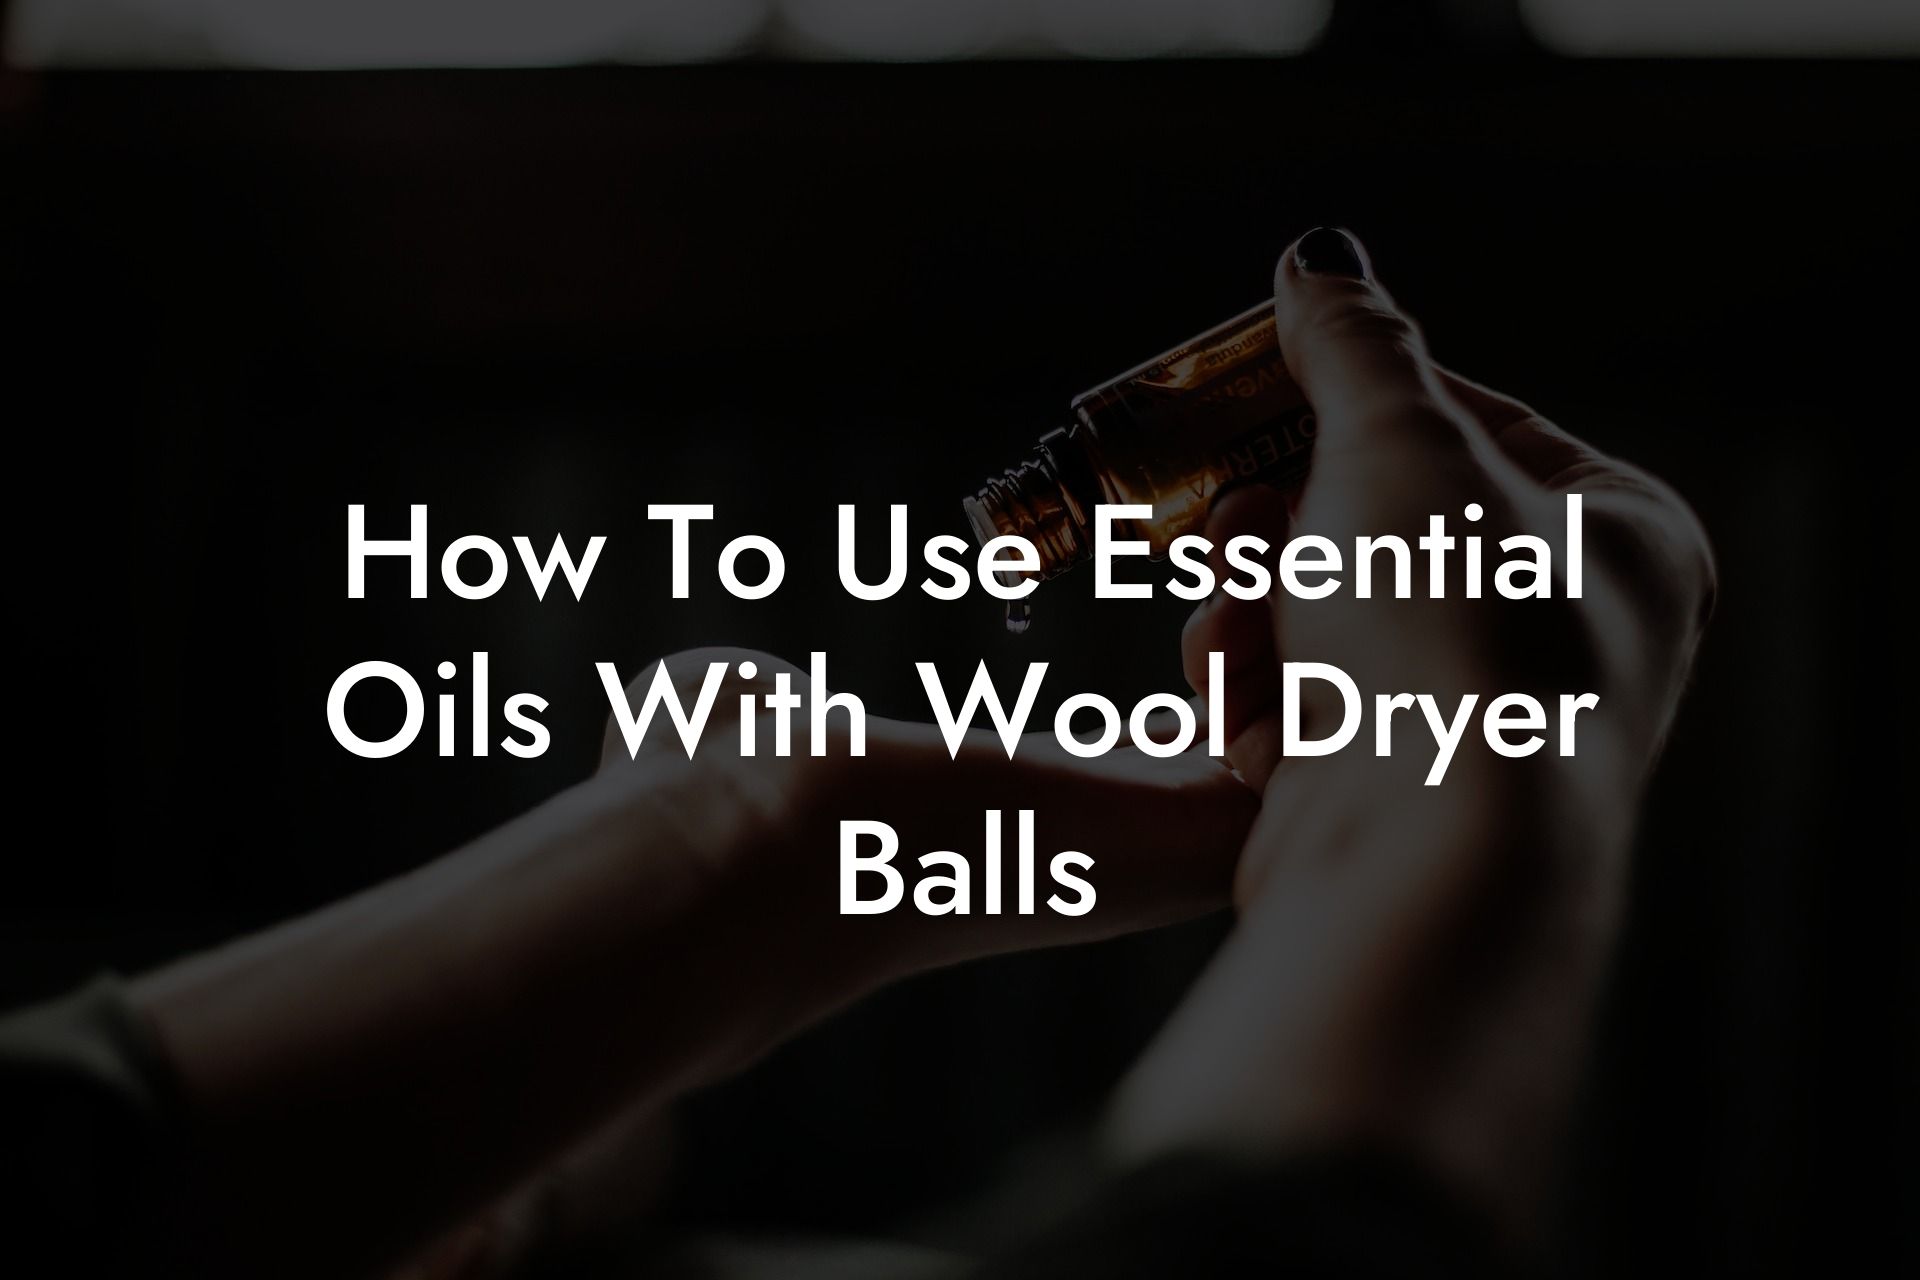 How To Use Essential Oils With Wool Dryer Balls